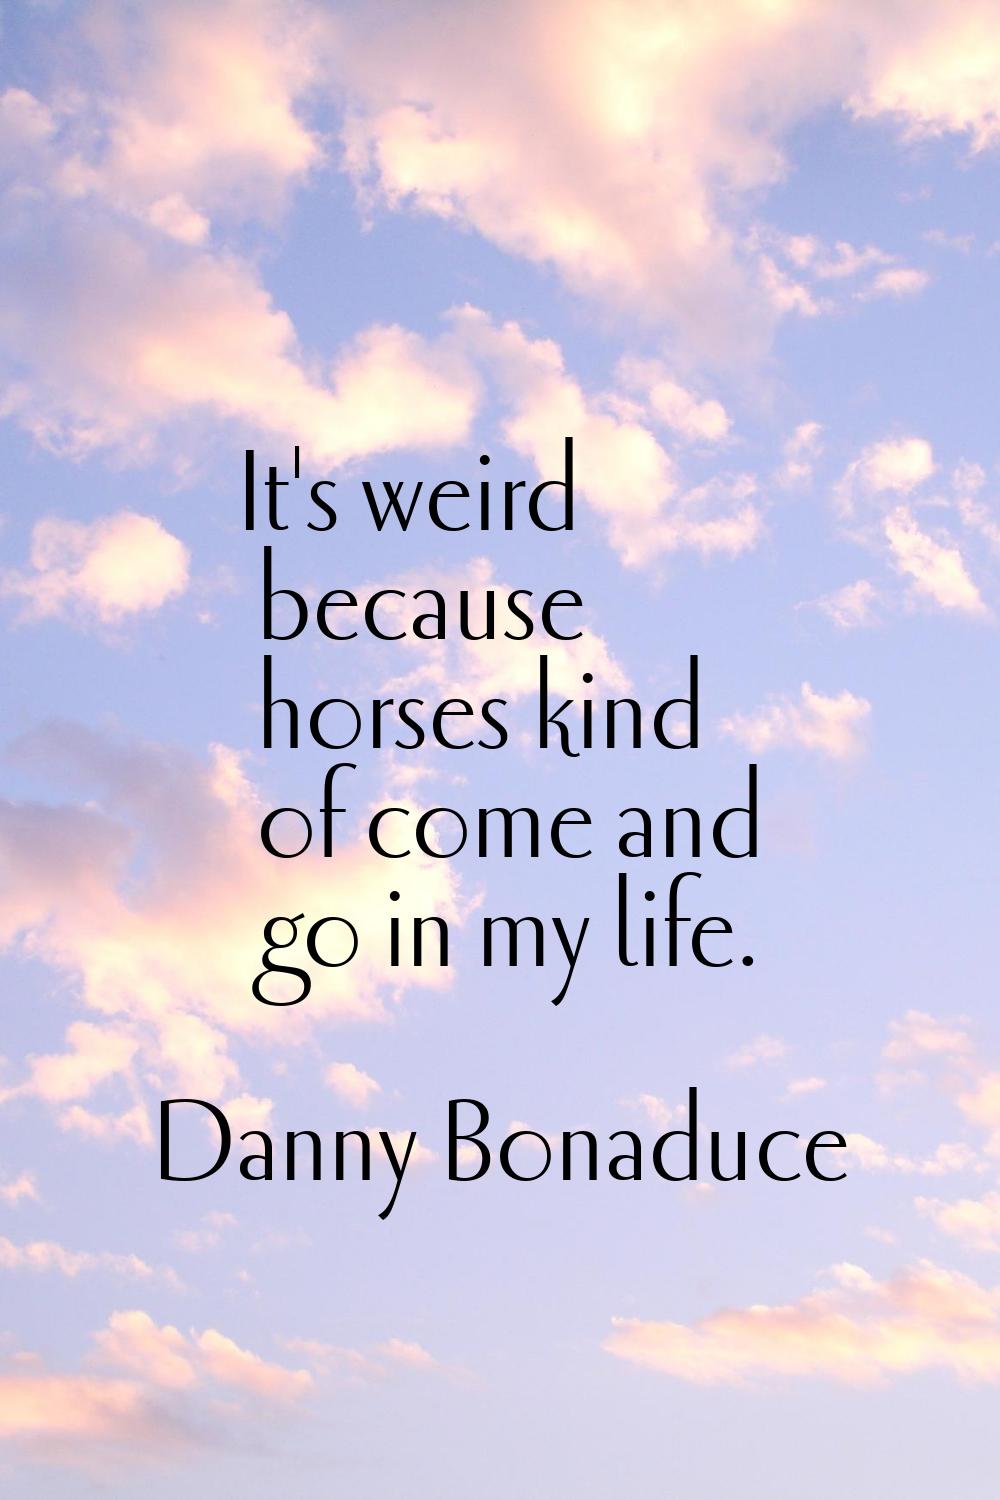 It's weird because horses kind of come and go in my life.